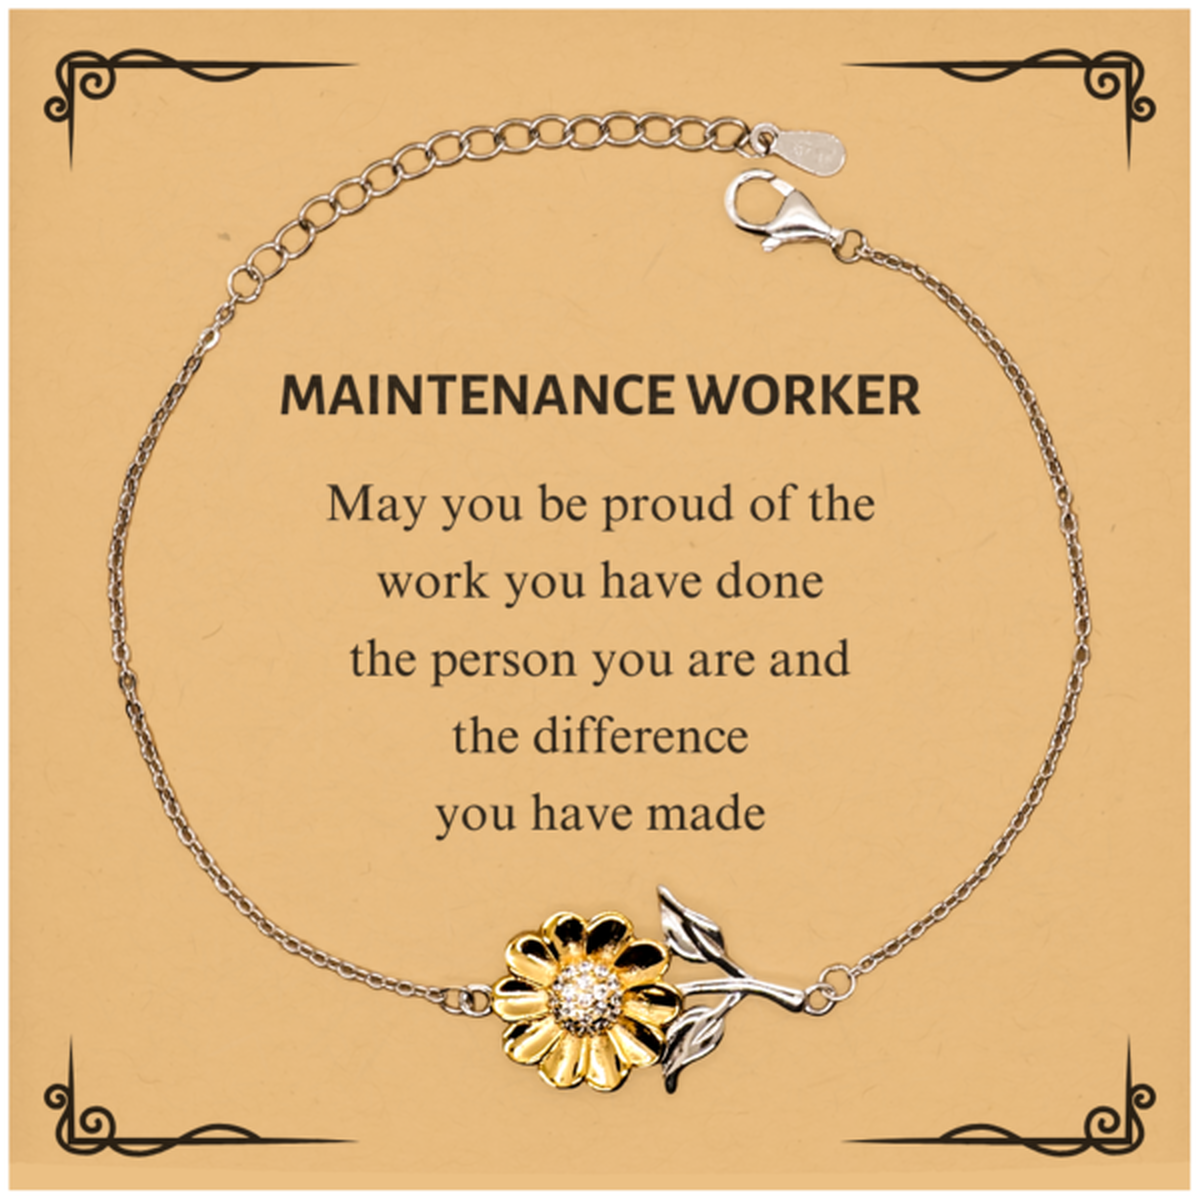 Maintenance Worker May you be proud of the work you have done, Retirement Maintenance Worker Sunflower Bracelet for Colleague Appreciation Gifts Amazing for Maintenance Worker